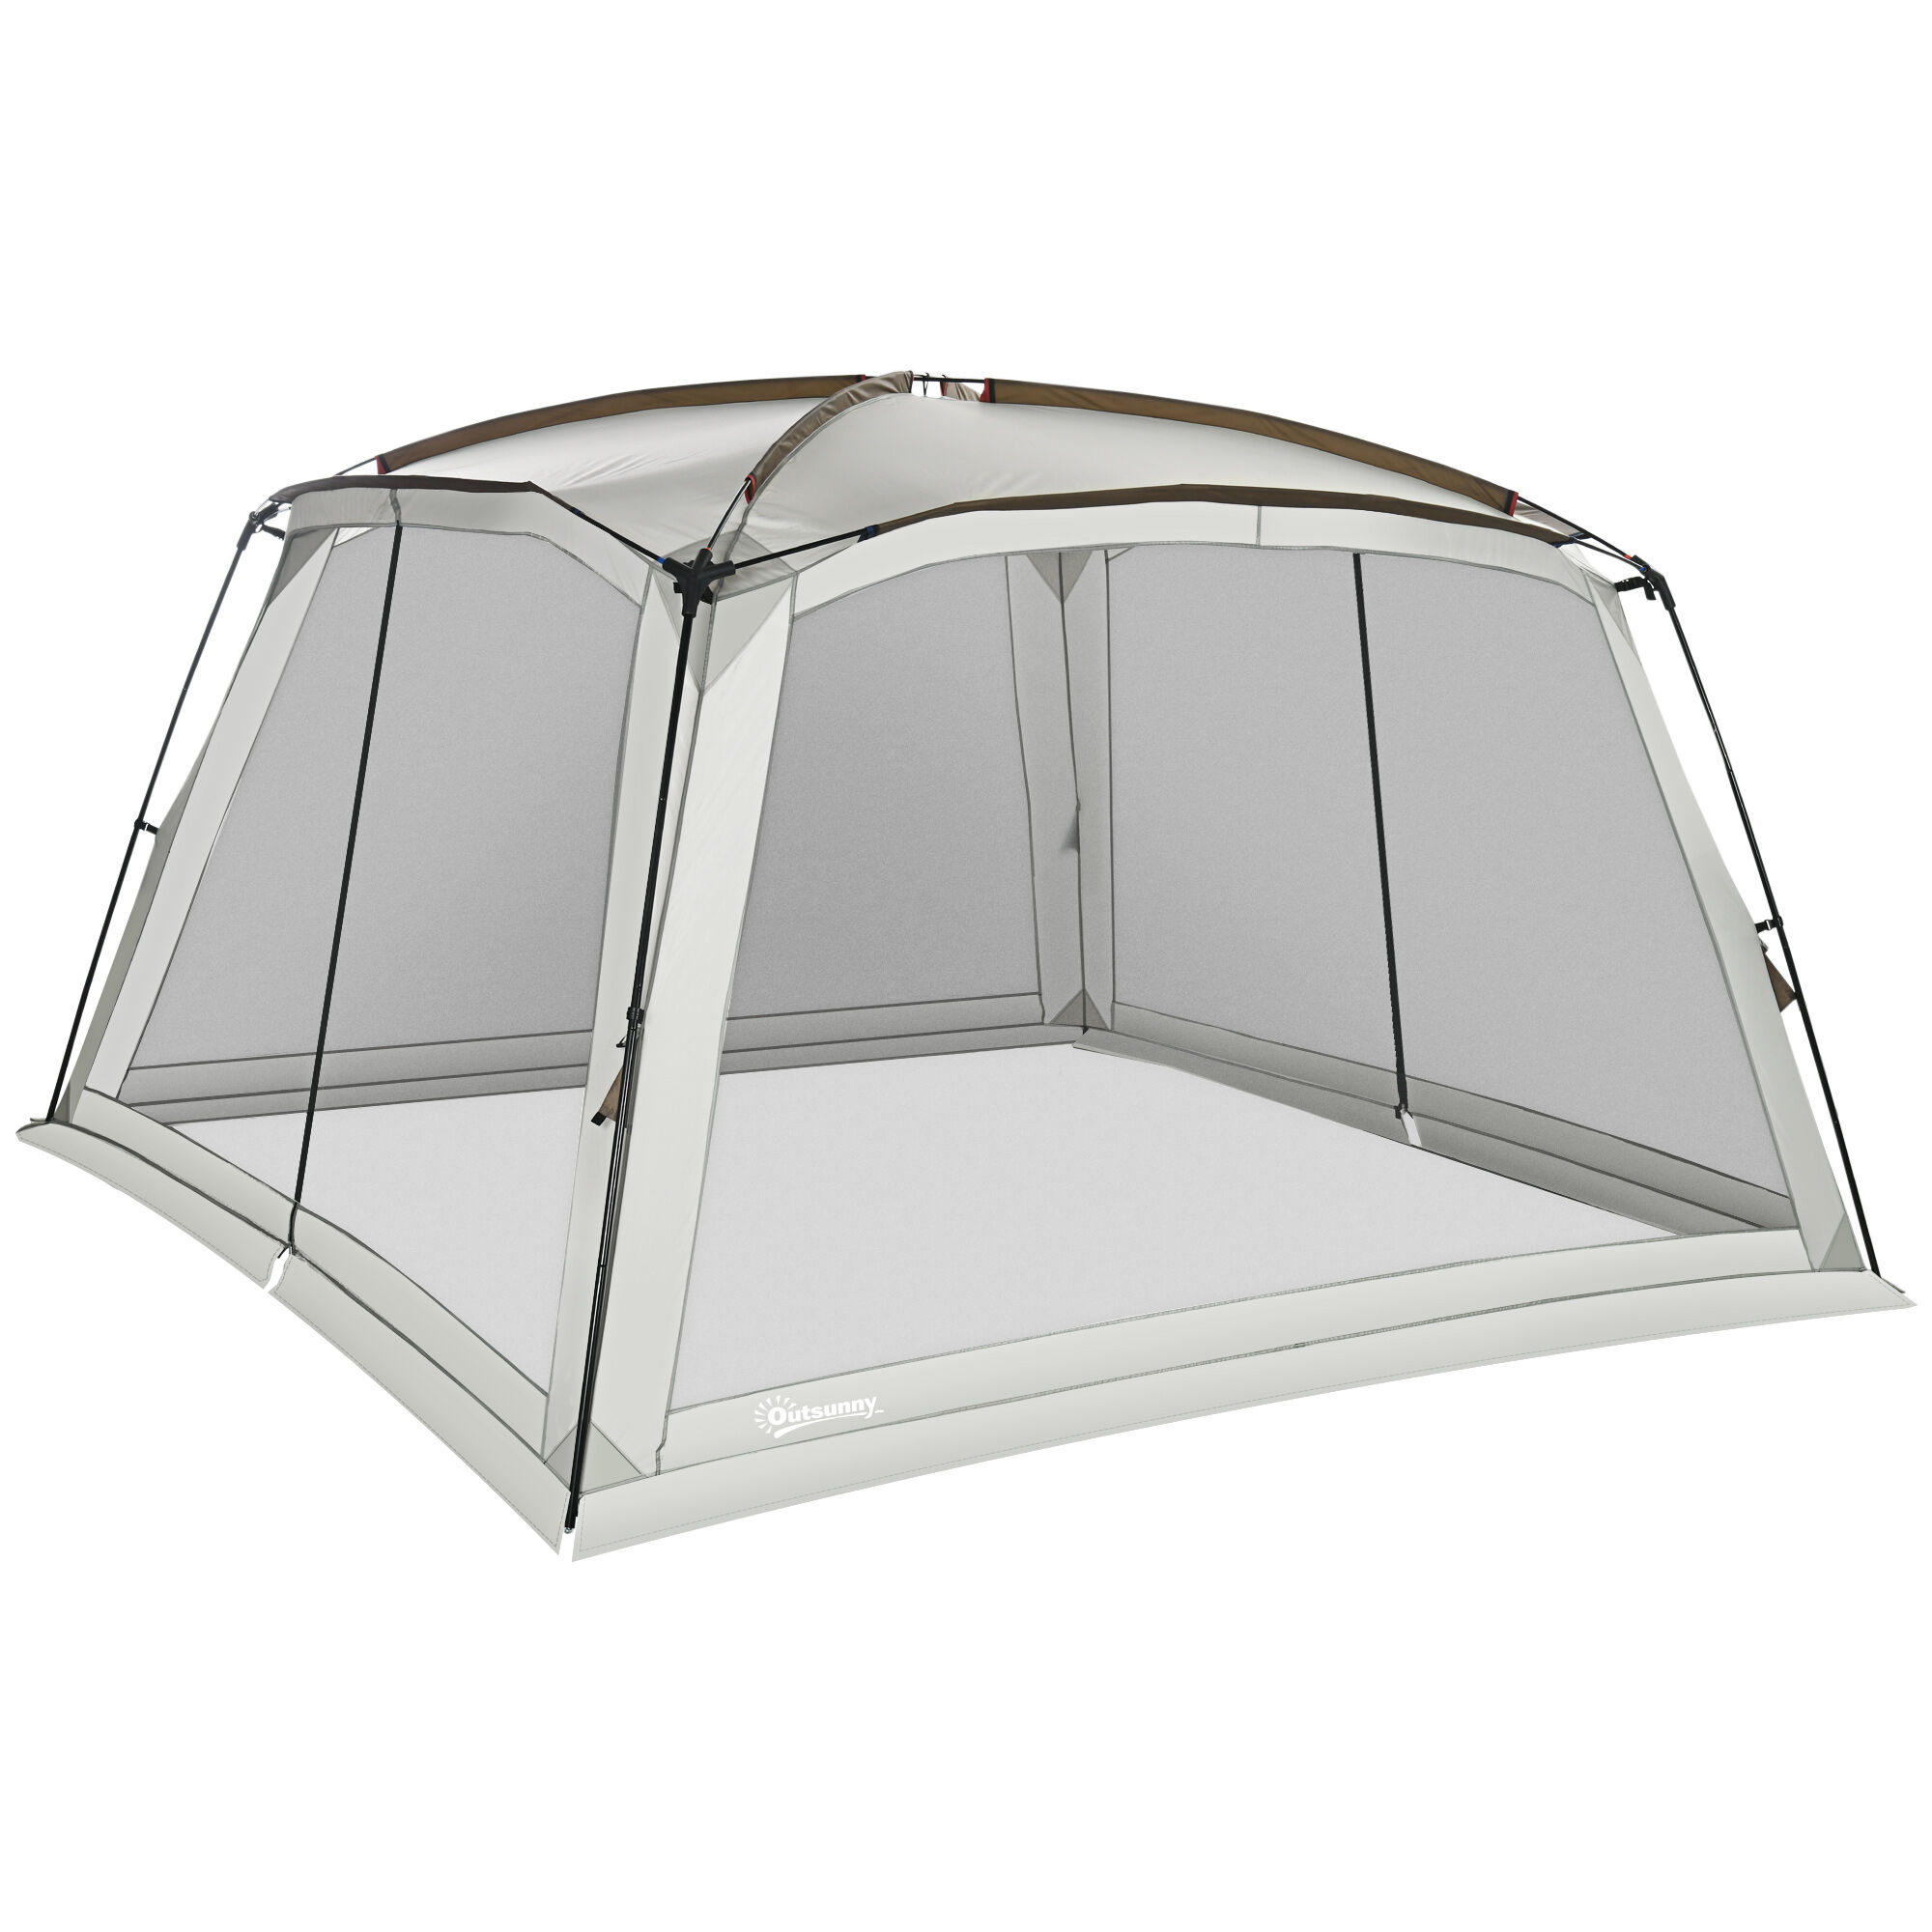 Outsunny 12x12 Screen House UV50+ Protection Tent with 2 Doors Easy Setup for Outdoor Camping Patios with Carry Bag   Aosom.com